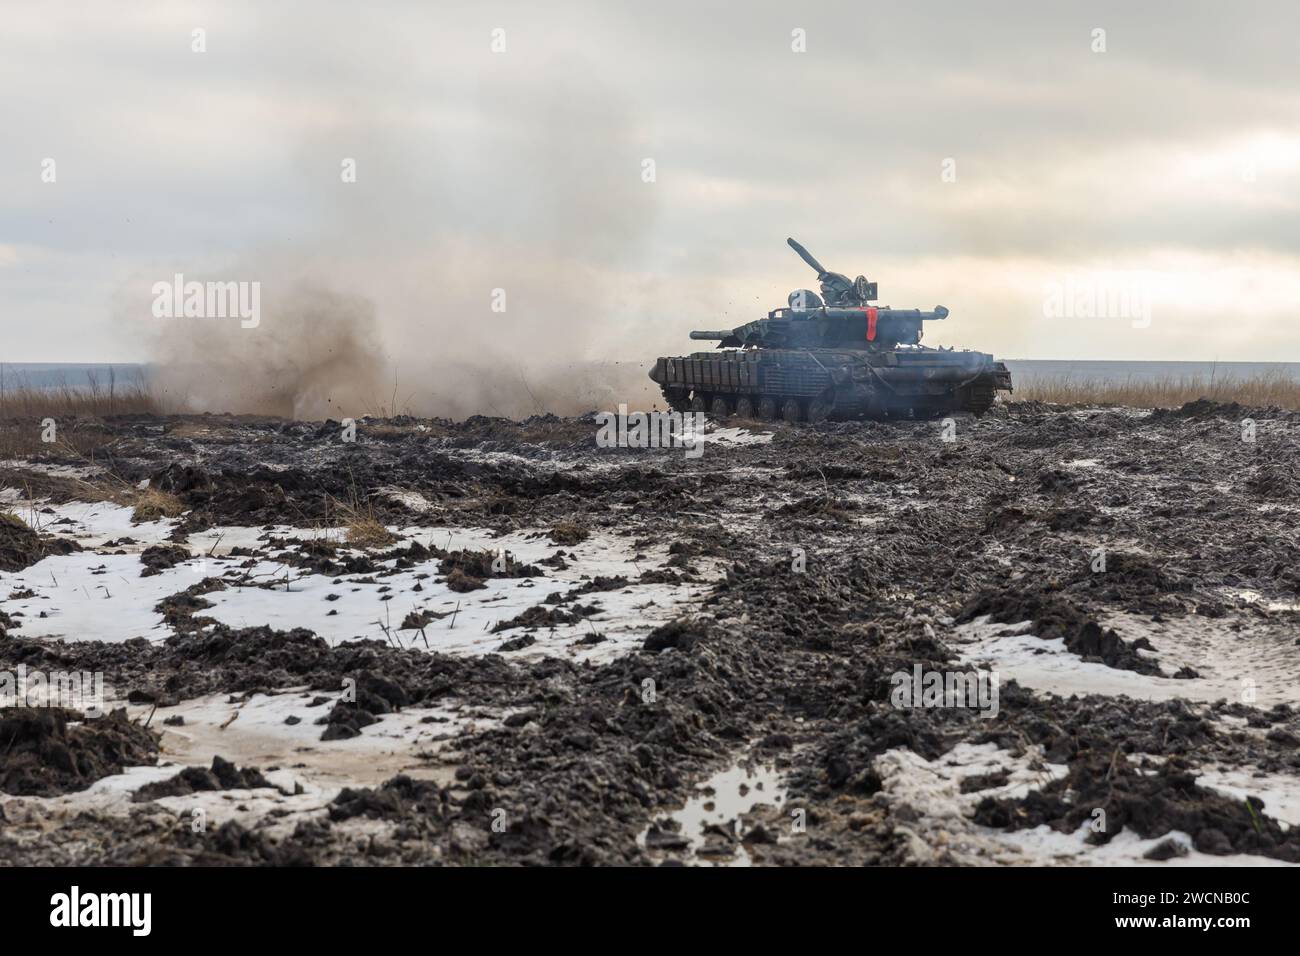 A tank is seen in the roadless area going on a combat mission. Tank battalion of the 41st Mechanized Brigade of the Armed Forces of Ukraine in Kharkiv region, Ukraine. The war of the Russian Federation against Ukraine has been going on for 2 years now. Ukrainian troops are courageously defending their country. (Photo by Mykhaylo Palinchak / SOPA Images/Sipa USA) Stock Photo